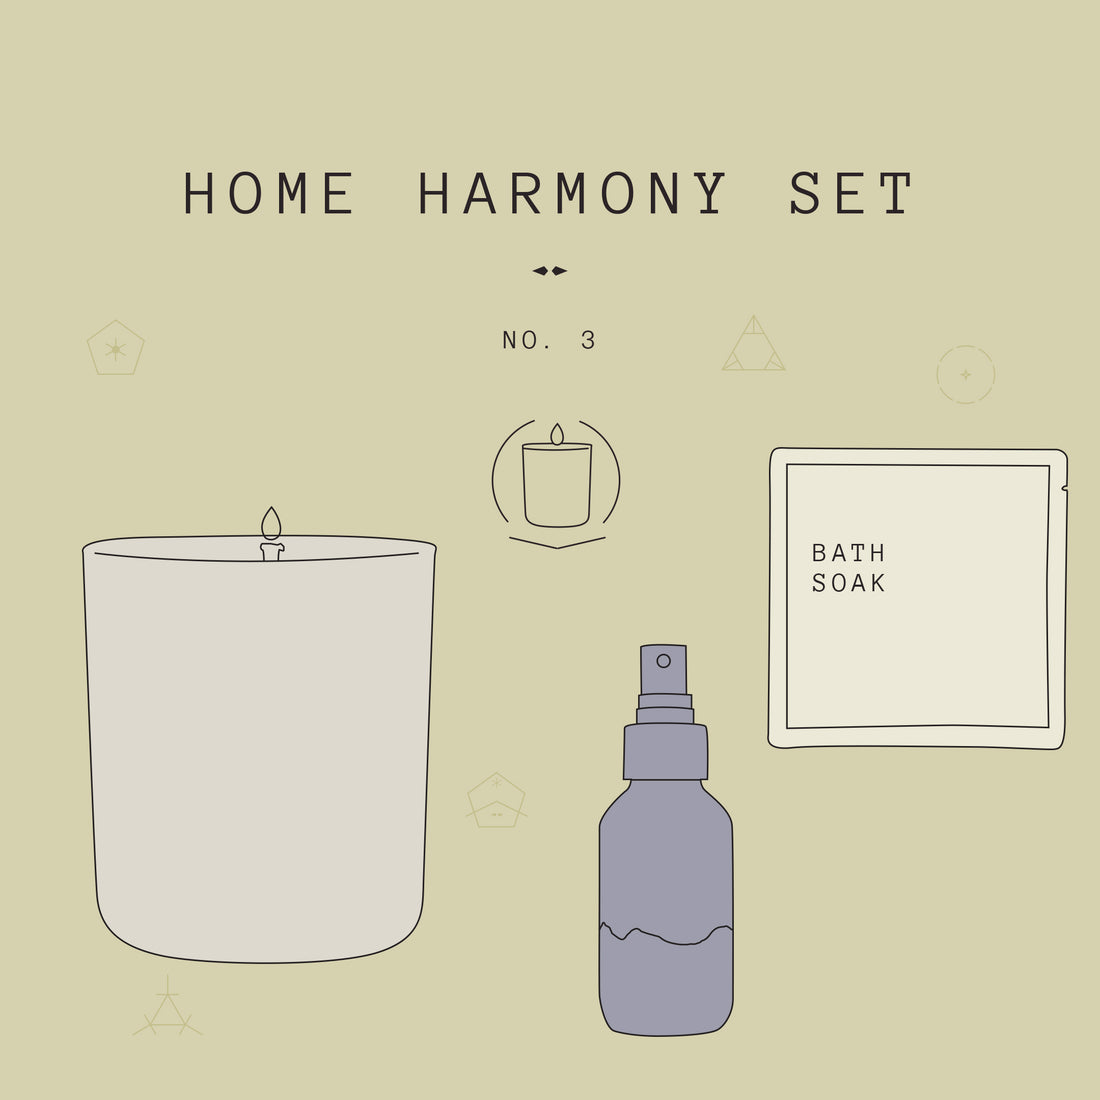 Home Harmony 3 Gift Set is crafted to help purify the air in your favourite spaces, while creating a soothing ambience.  PRODUCTS INCLUDED: ・Addition Studio Australian Native Bath Soak Sachet, 75gm ・Addition Studio Sunflower Galaxy Scented Candle, 285gm ・One Seed Heartland Purifying Room Spray, 100ml